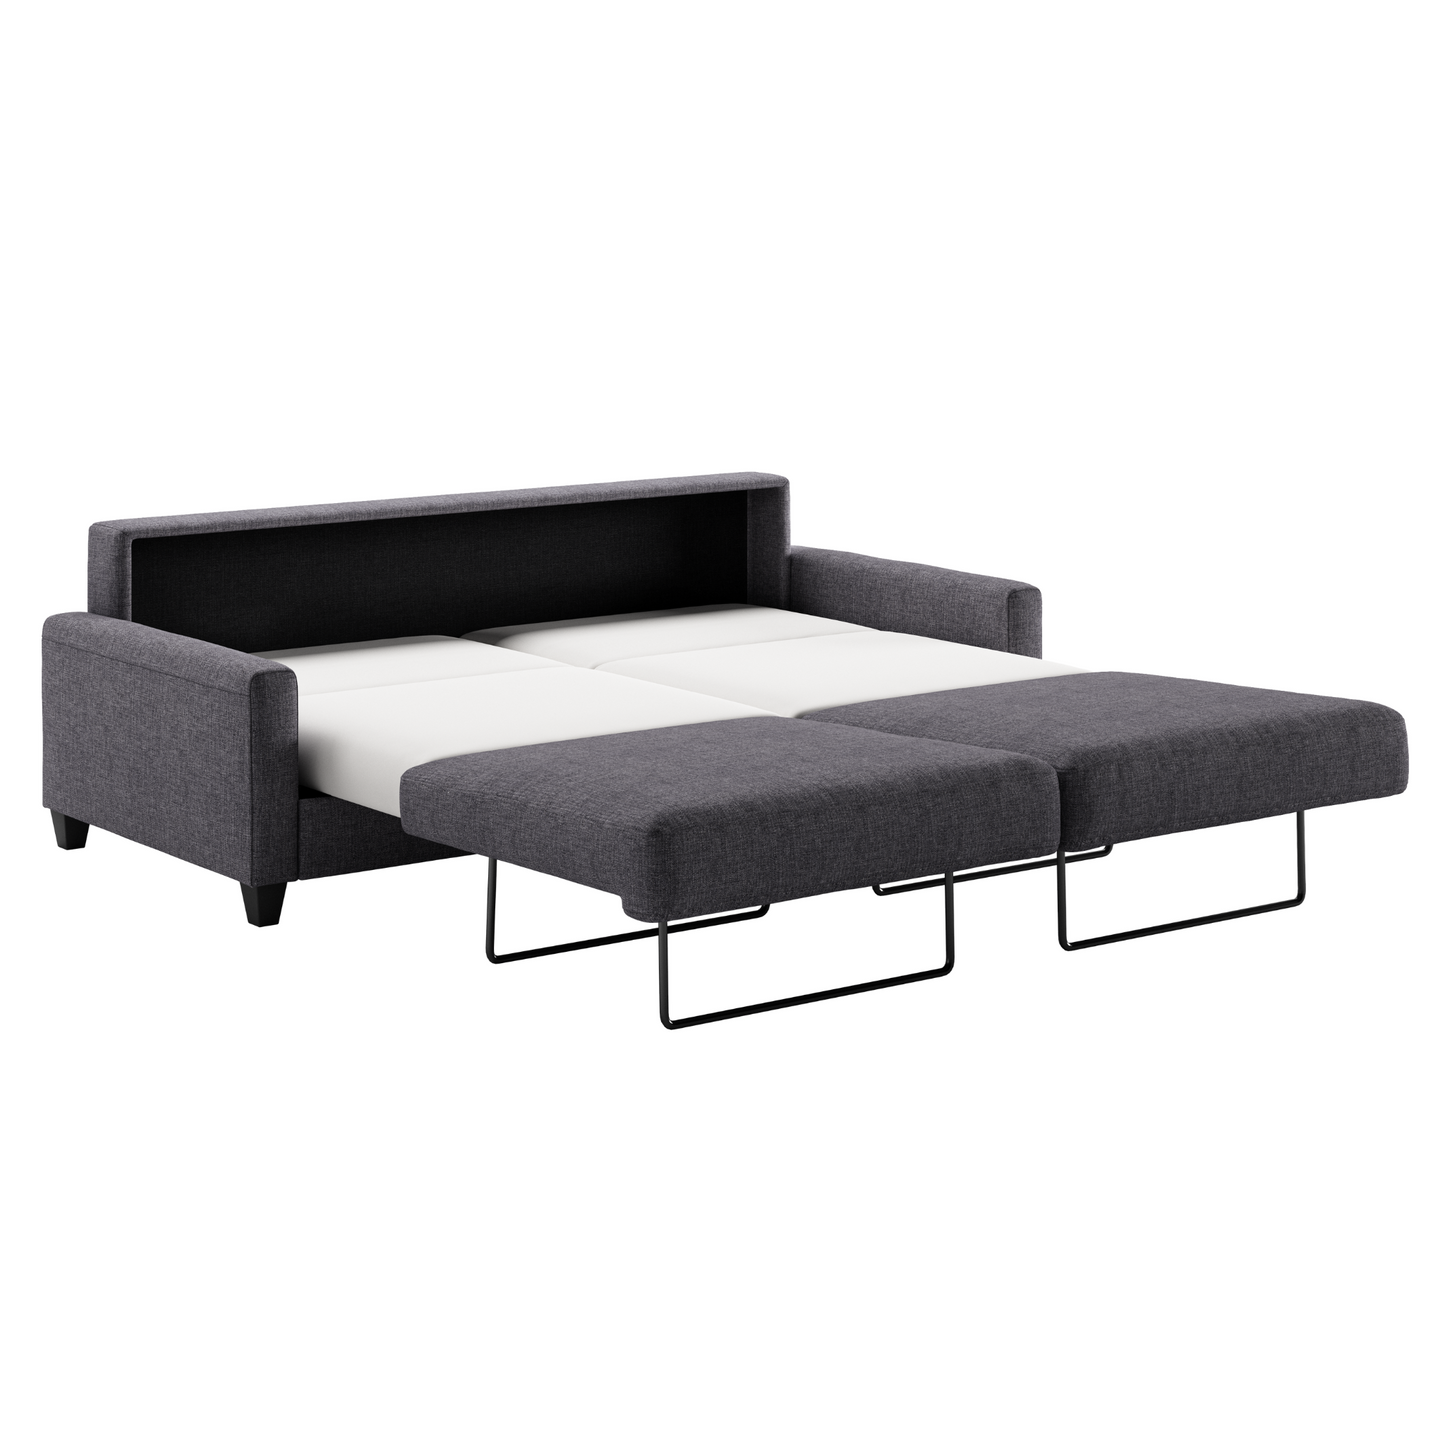 	Luonto Nico King Sleeper Sofa Quick Ship Program in Rene 04 Fabric (charcoal) with Open Sleeper Bed Shown from the Side